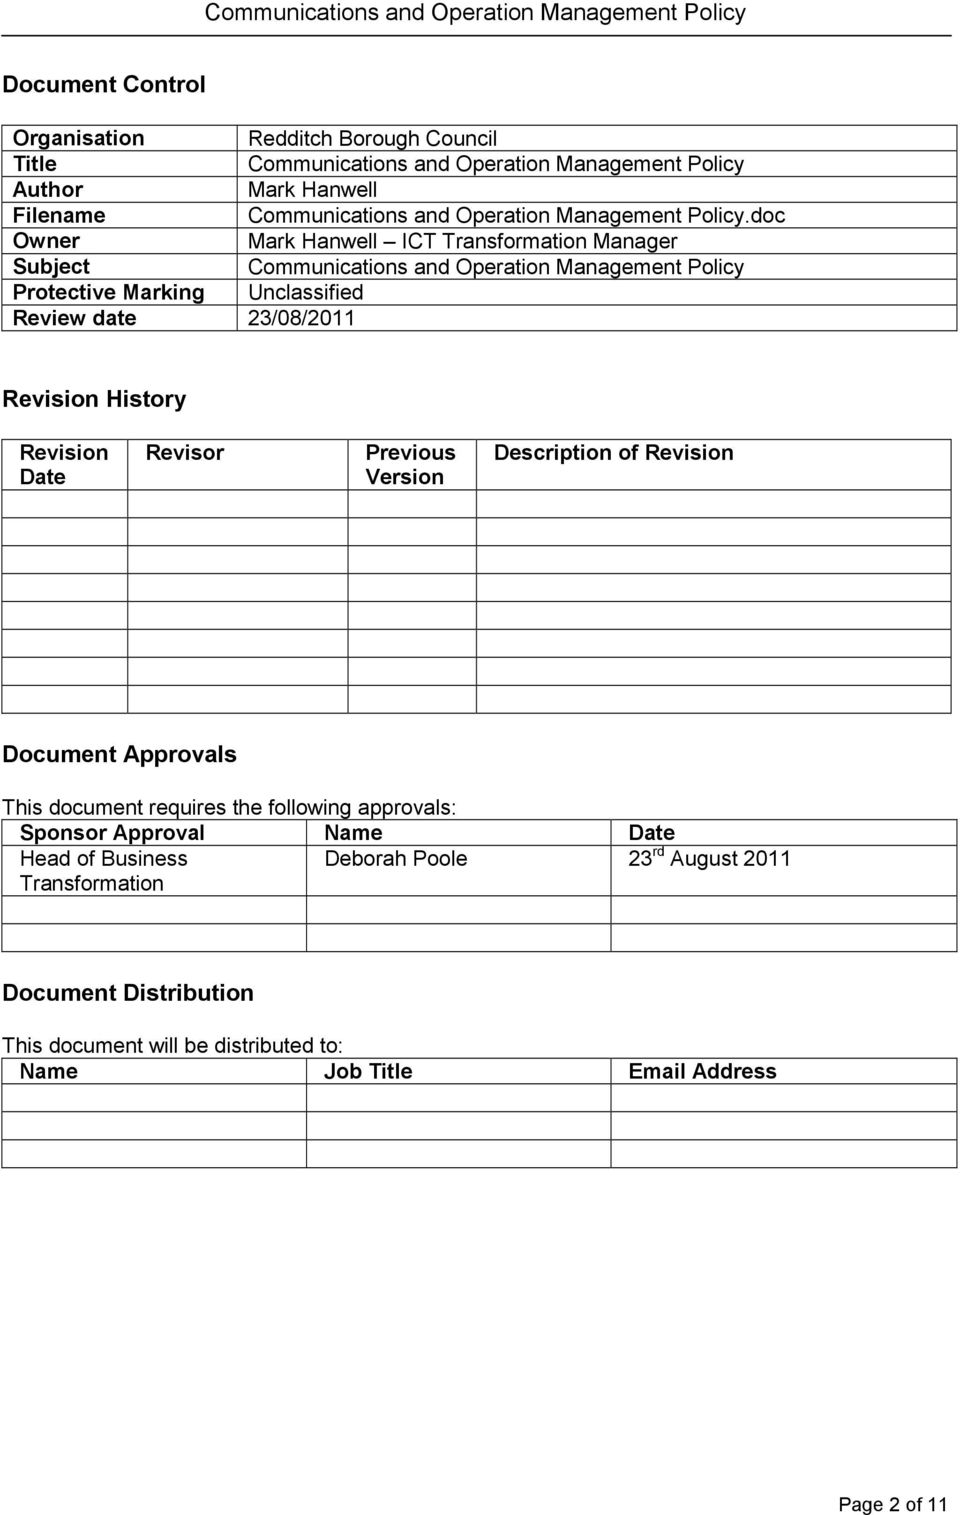 doc Owner Mark Hanwell ICT Transformation Manager Subject Communications and Operation Management Policy Protective Marking Unclassified Review date 23/08/2011 Revision